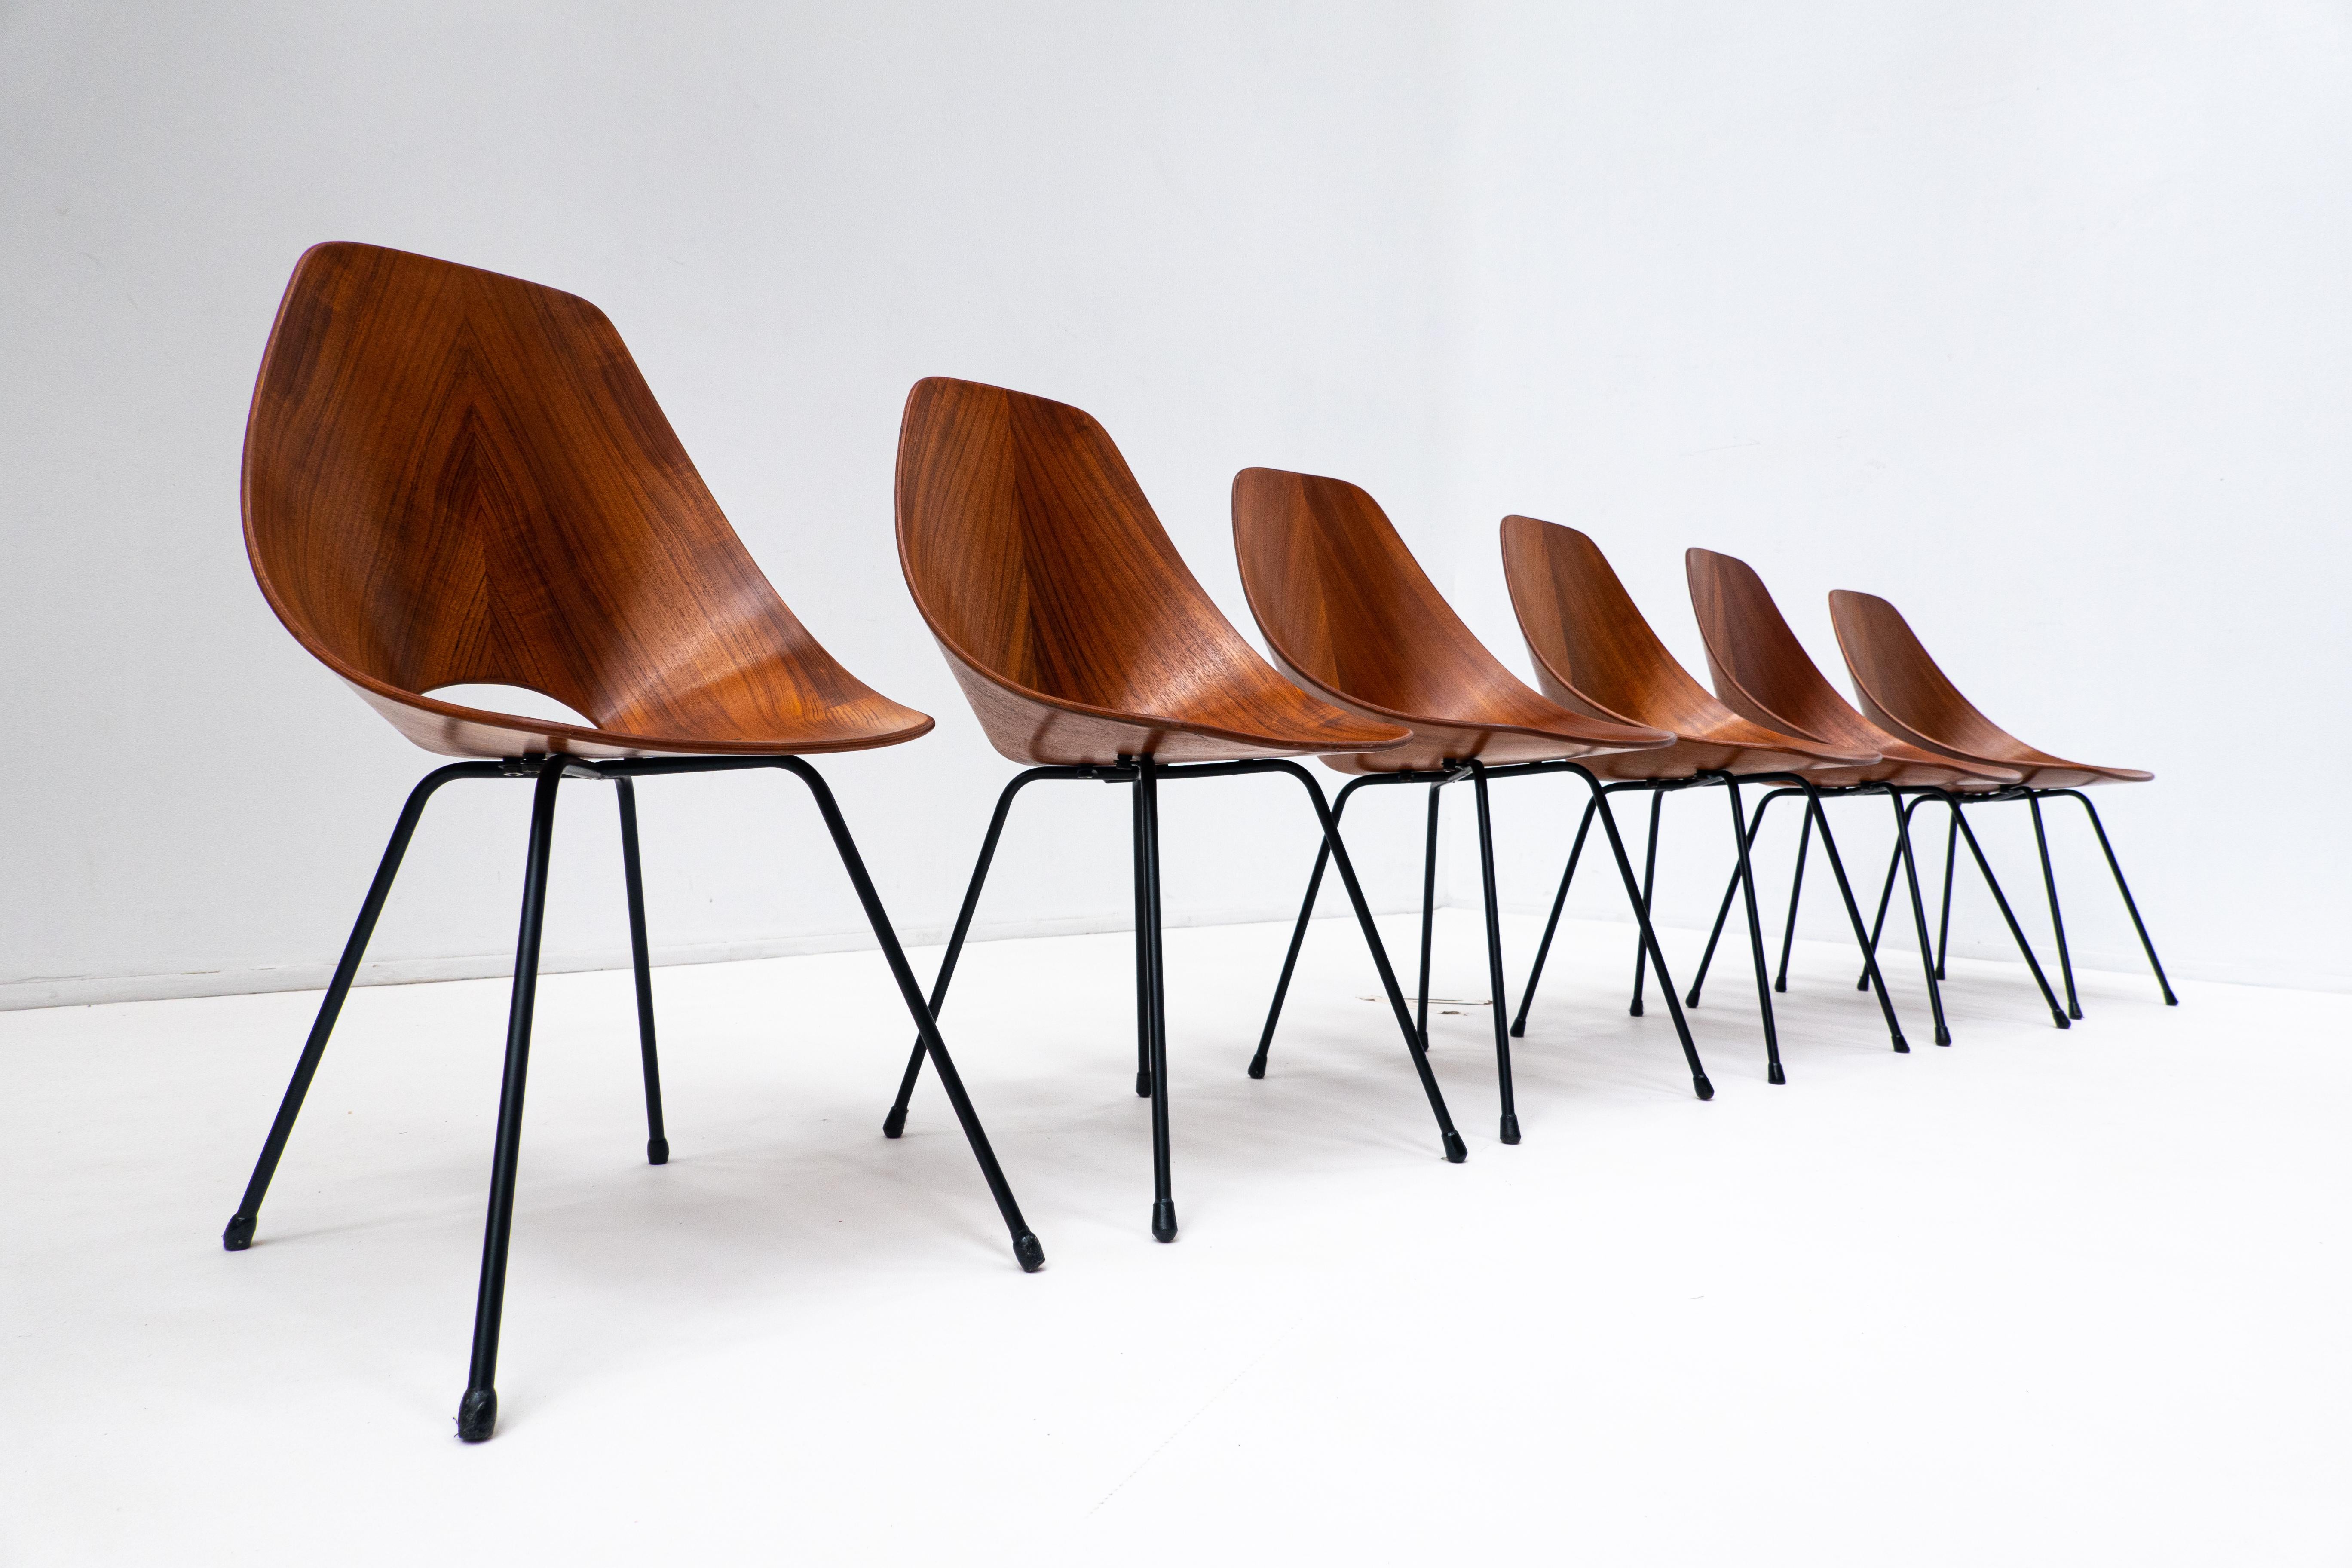 Set of 6 Mid-Century wooden dining chair by Vittorio Nobili for Fratelli Tagliabue - Italy 1950s.